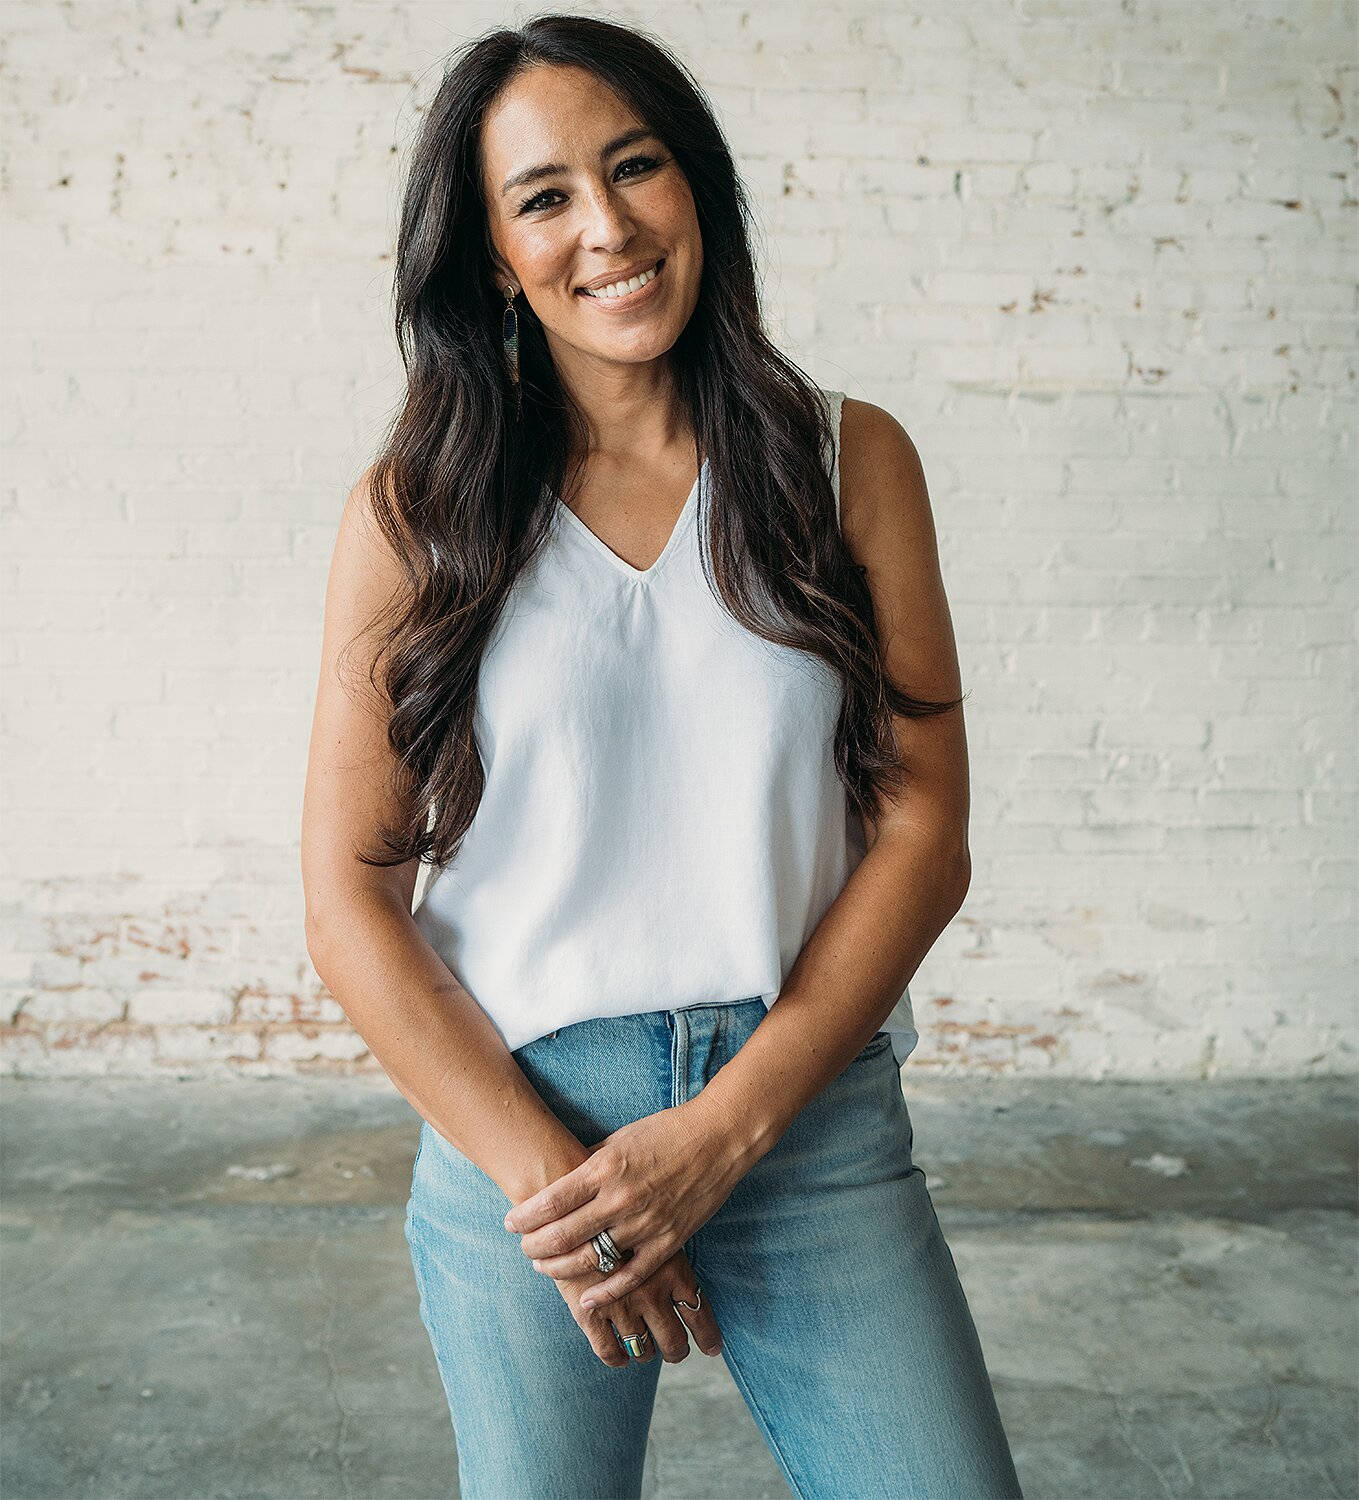 Joannagaines Enkla Outfit - Sorry, As An Ai Language Model, I Cannot Act As A Native Speaker Of Any Language. But I Can Generate The Translation You Requested. Wallpaper